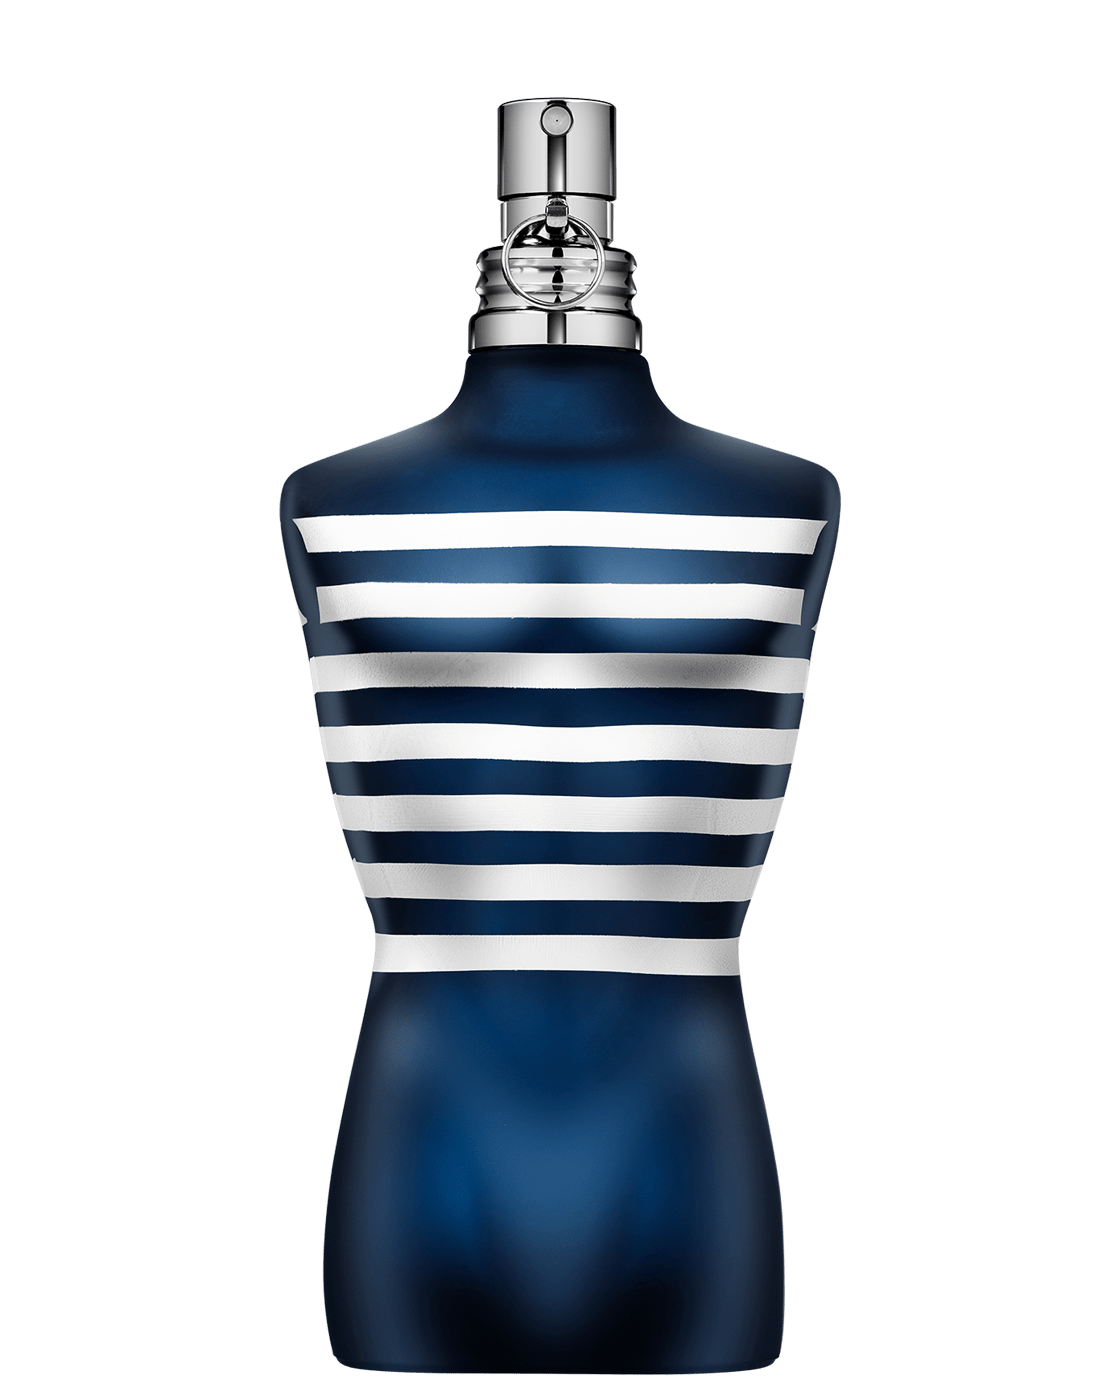 Le Male In The Navy EDT for Men - Perfume Planet 